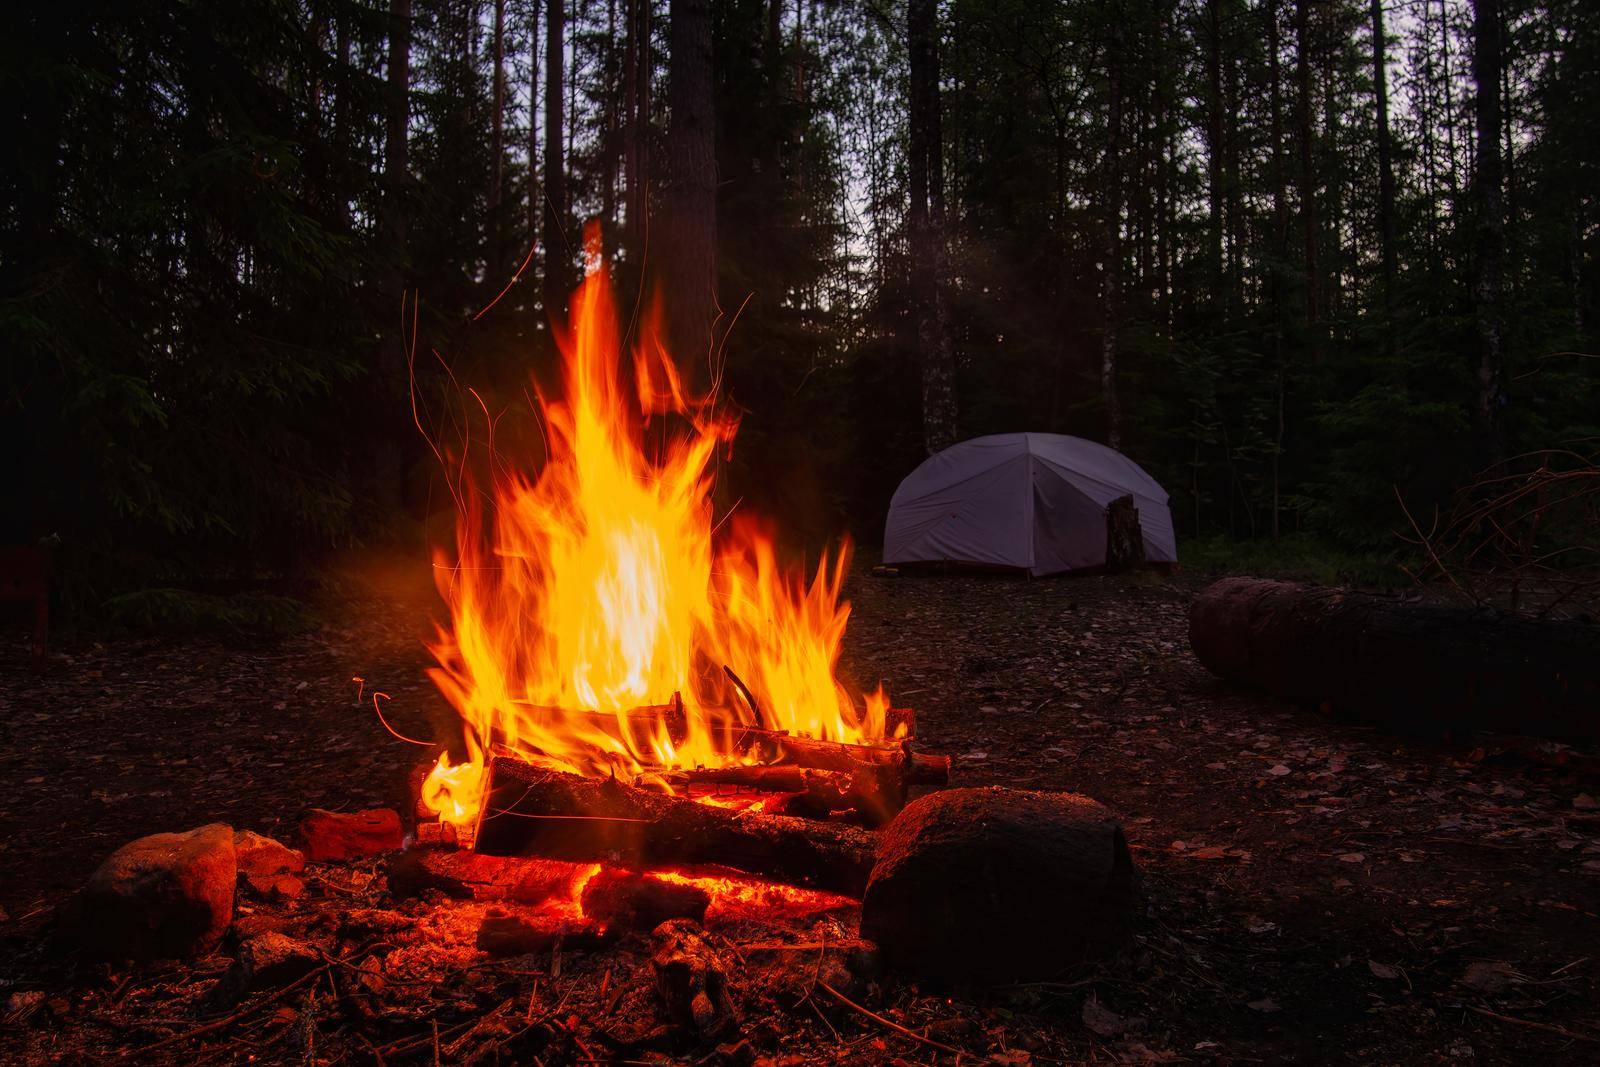 Burning campfire, with camping tent in the background, deep inside the forest, at sunset.